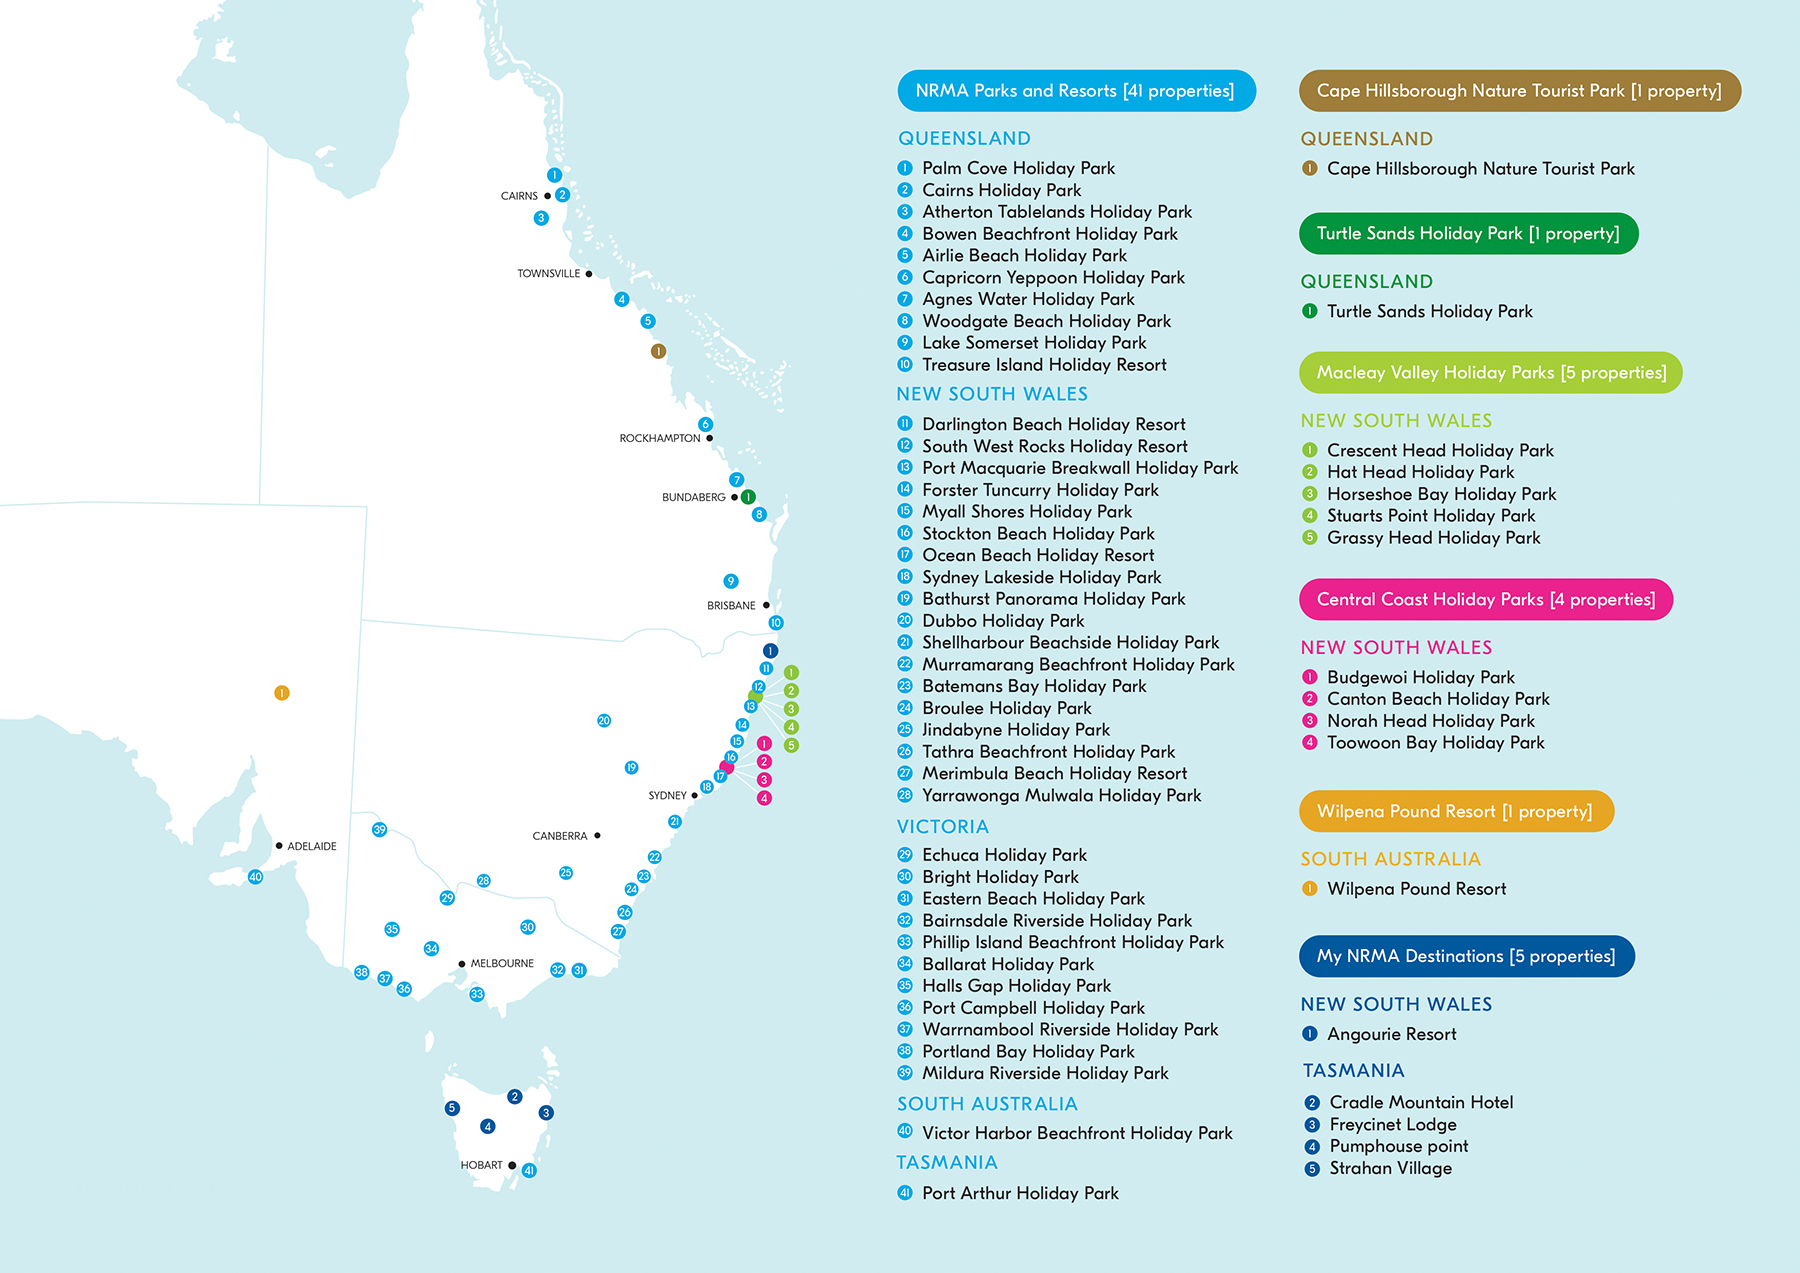 Map of Australia with location of NRMA holiday parks and resorts.